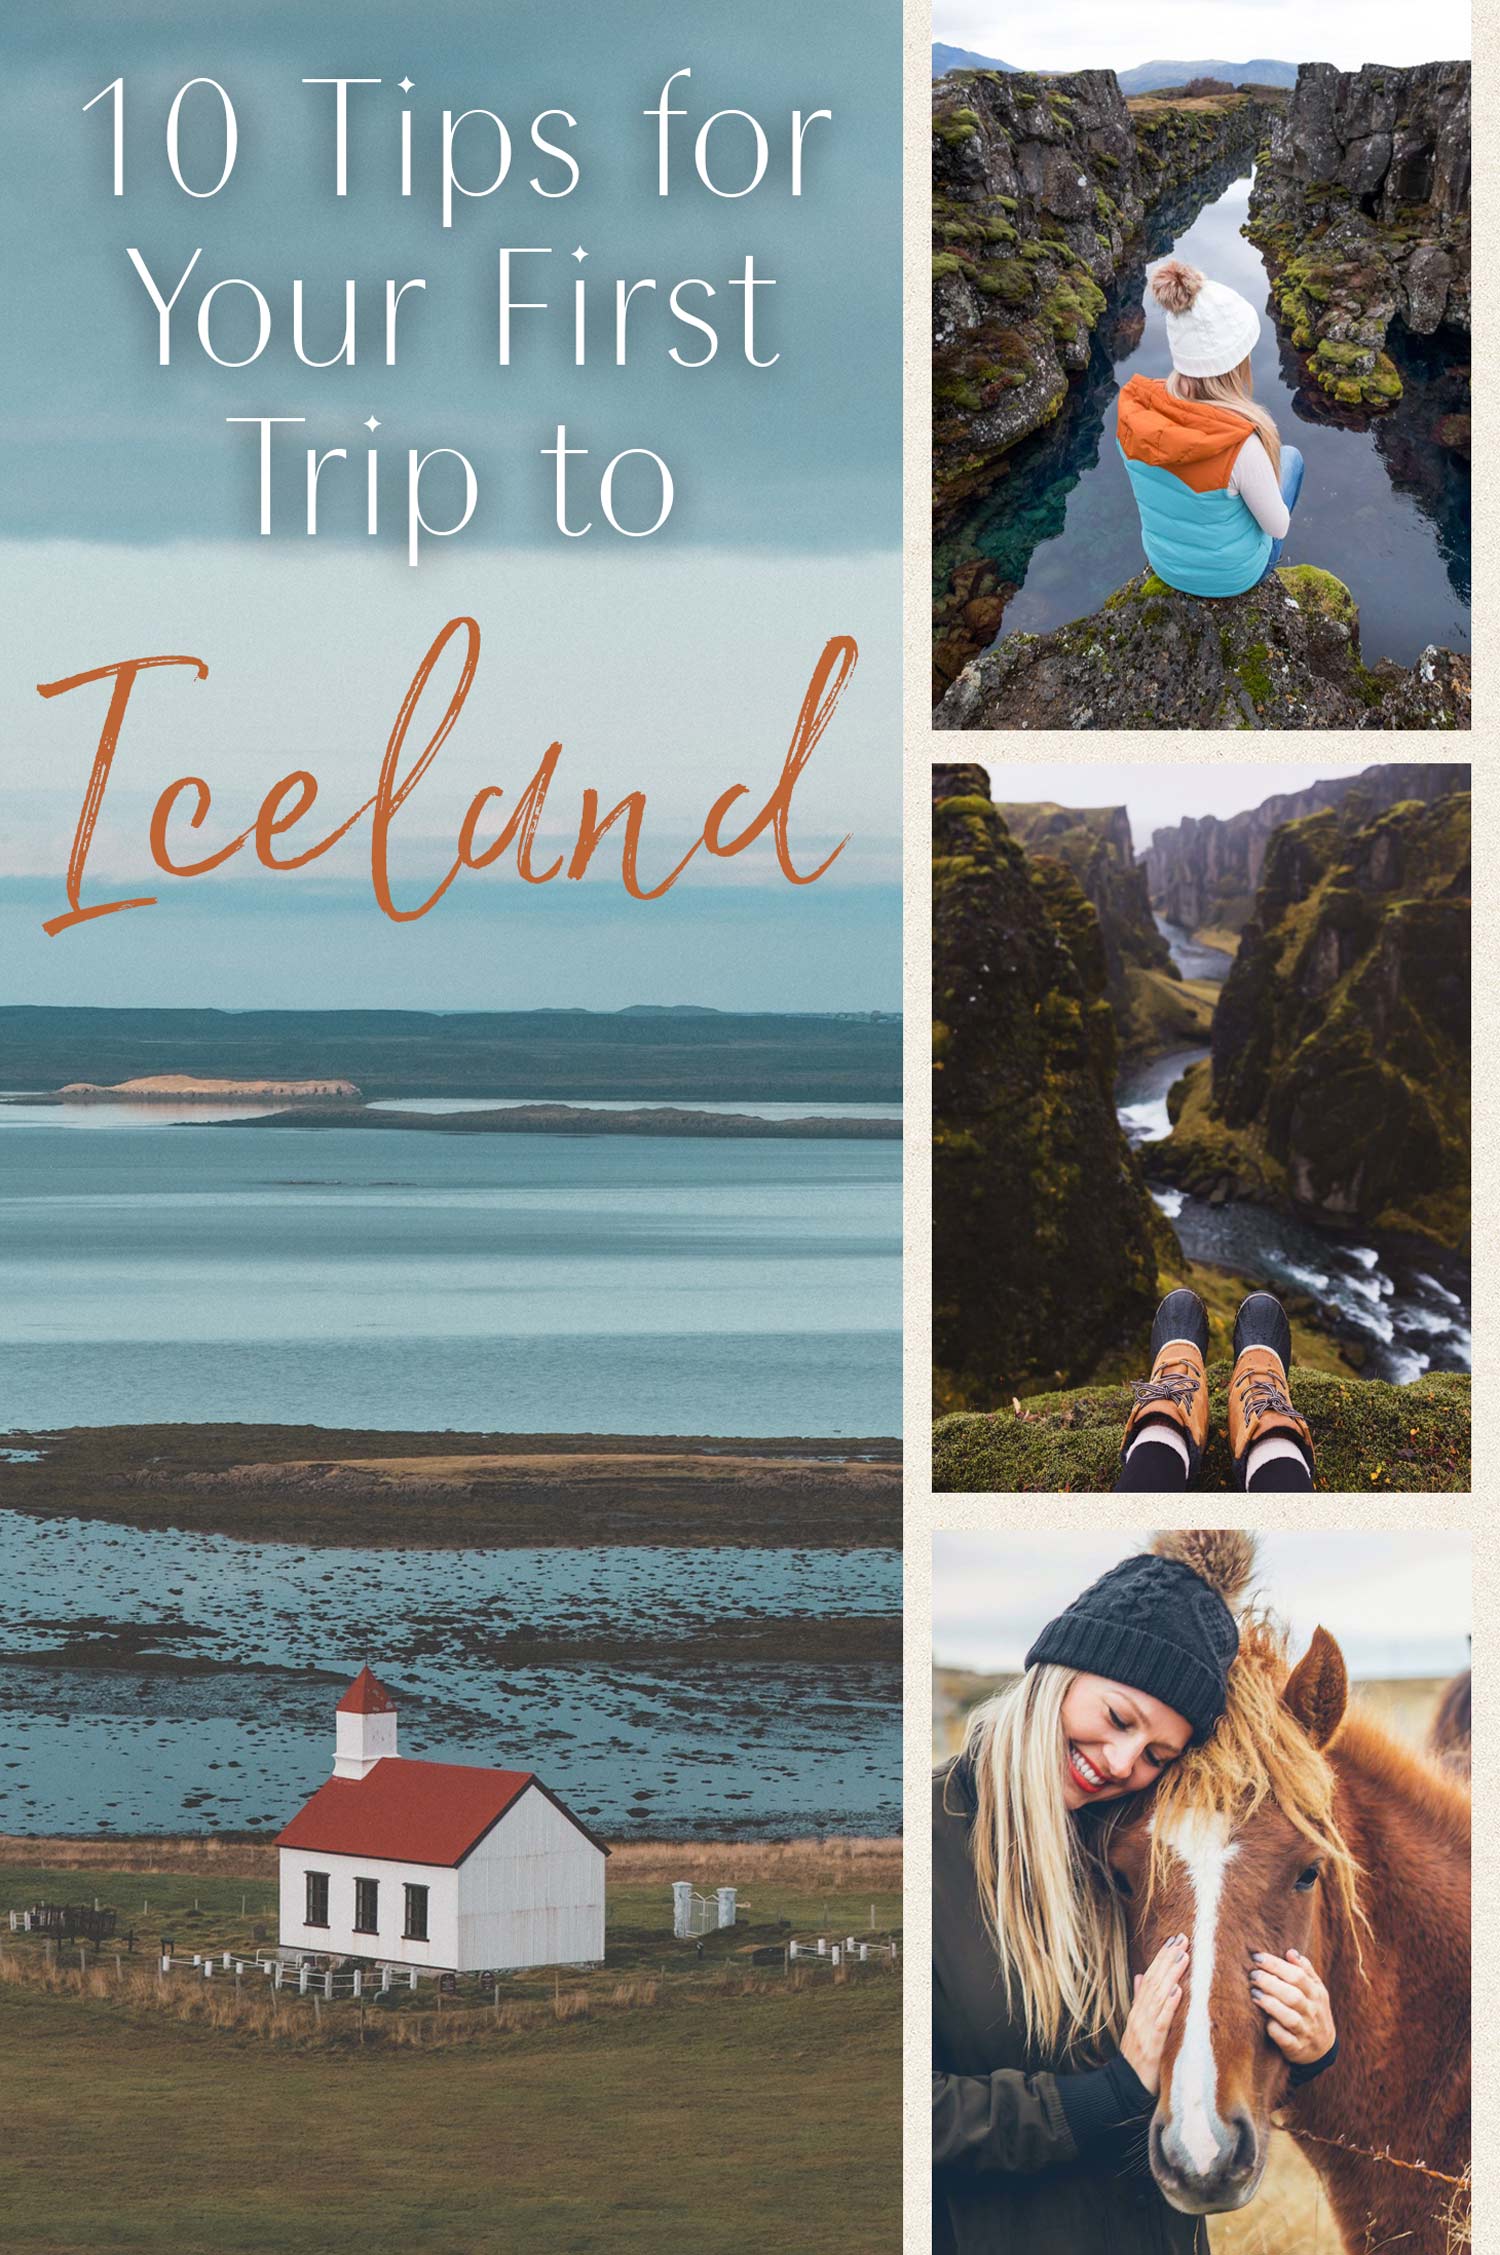 10 tips for your first trip to Iceland